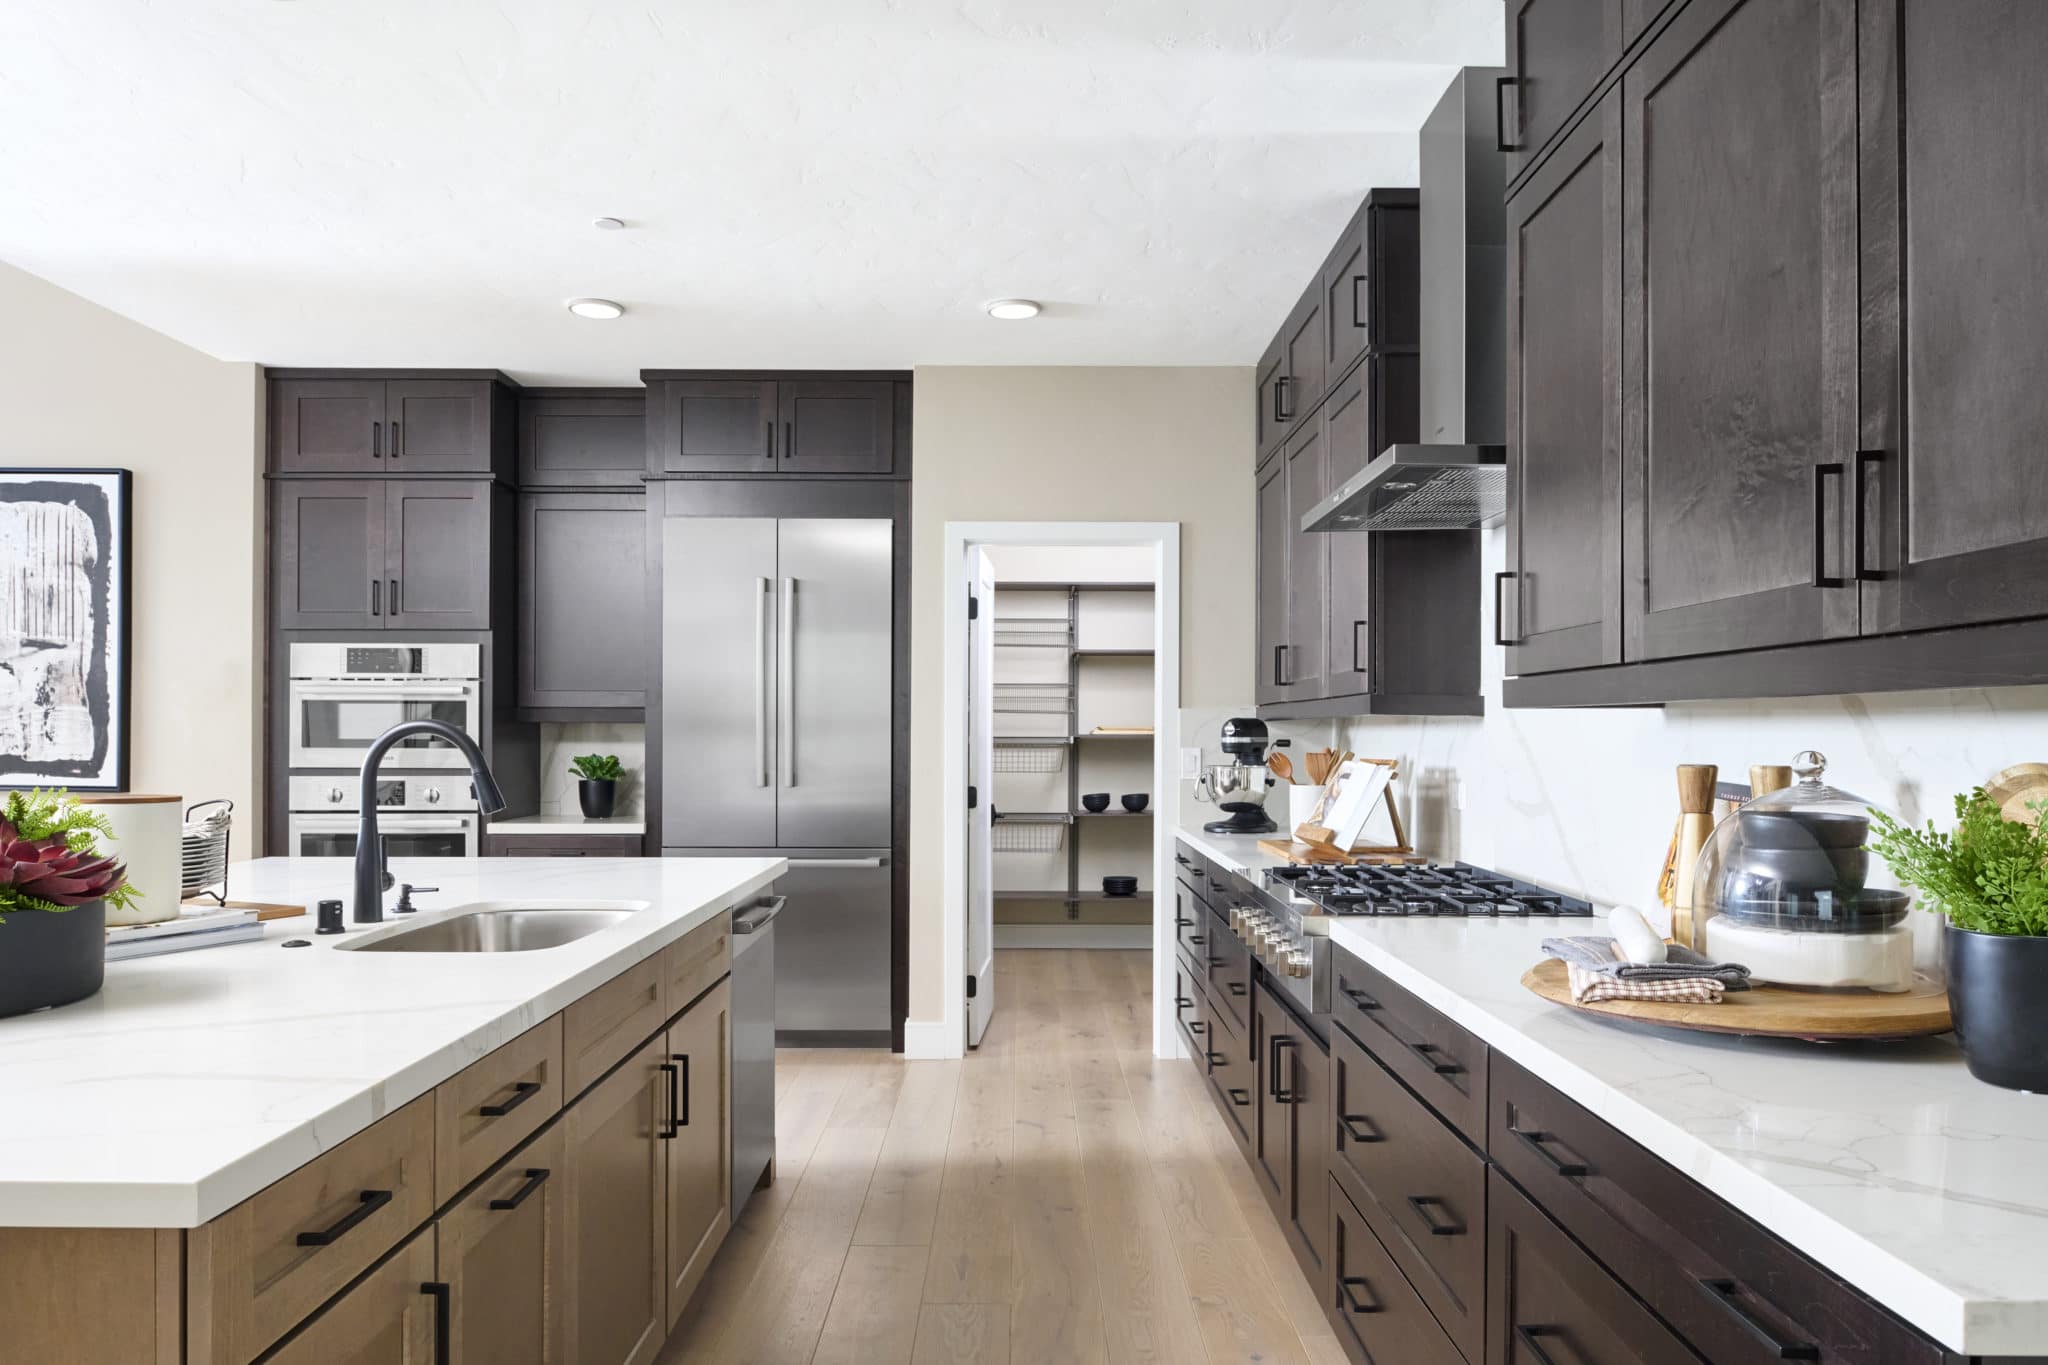 Kitchen of Plan 1 at Kings Canyon by Tri Pointe Homes